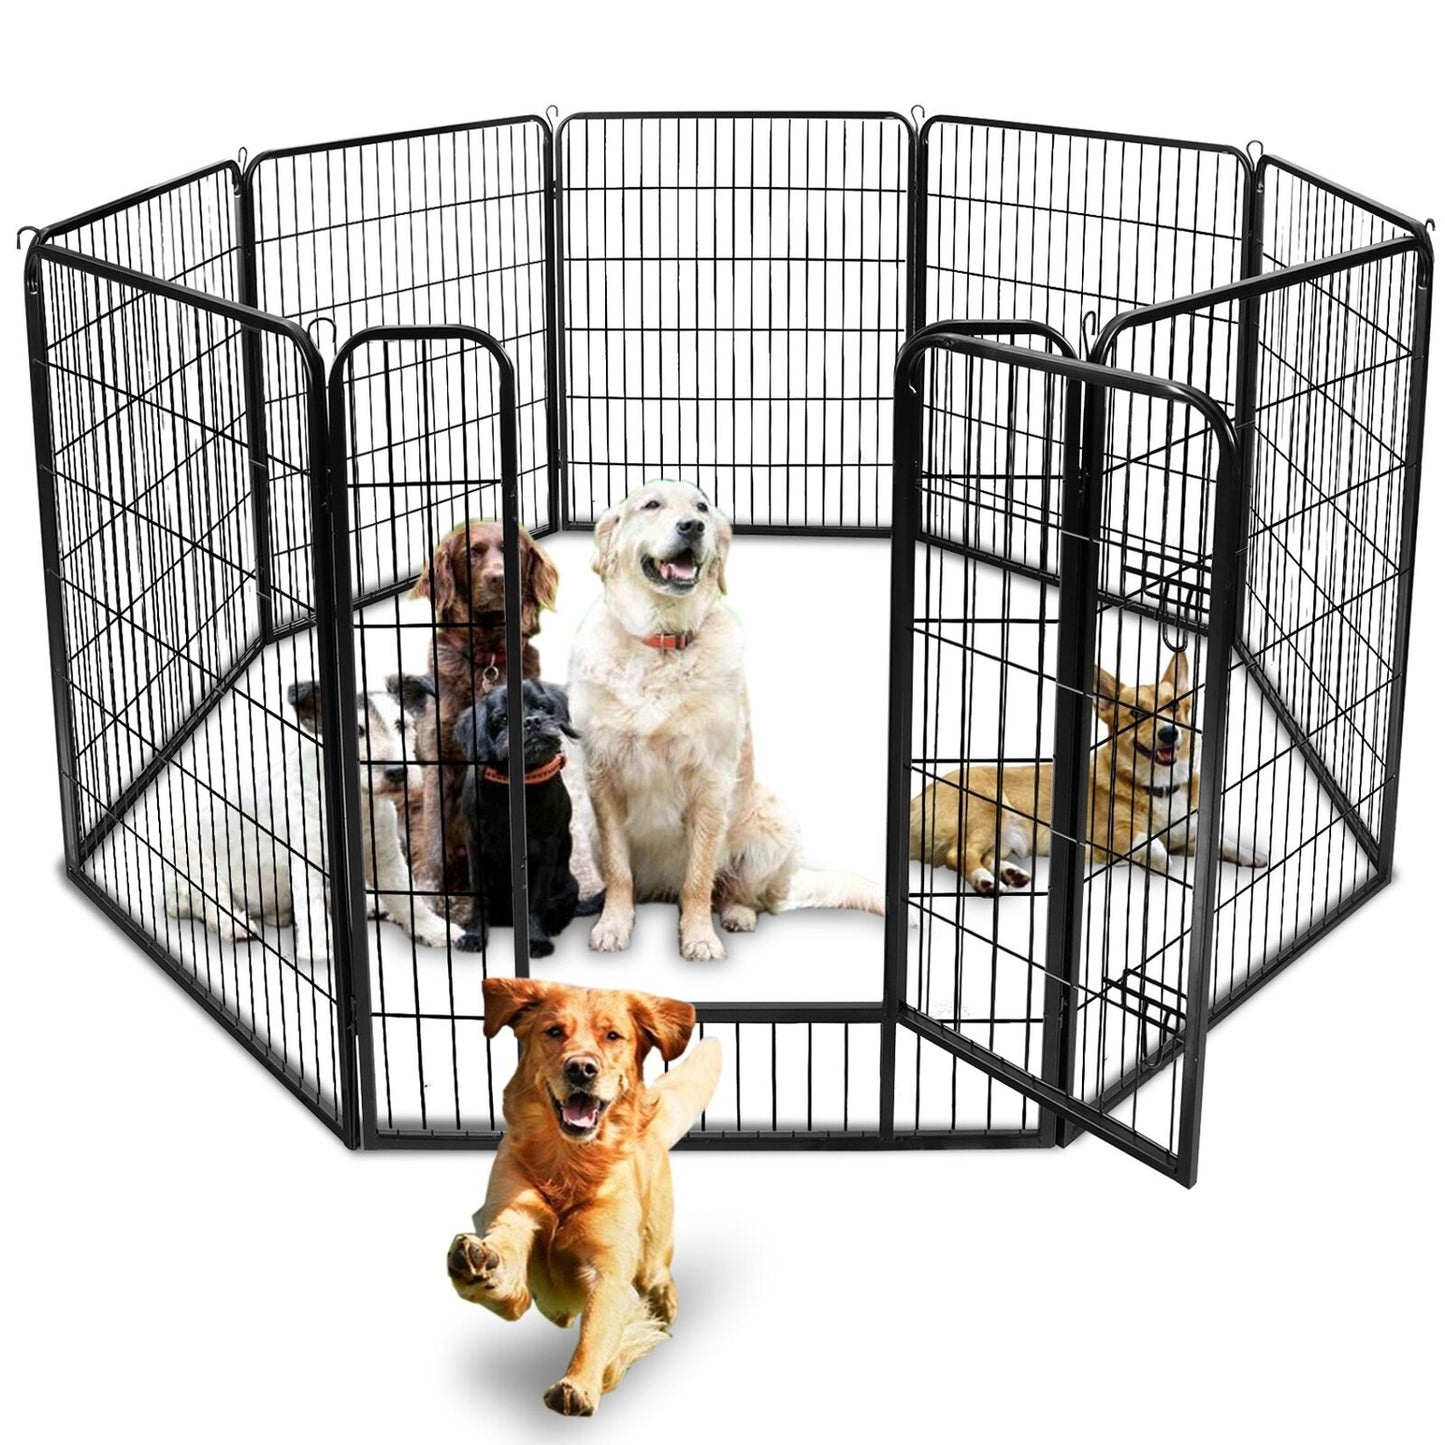 39"Tall Foldable 8 Panels Metal Pet Dog Puppy Cat Exercise Fence Barrier Playpen